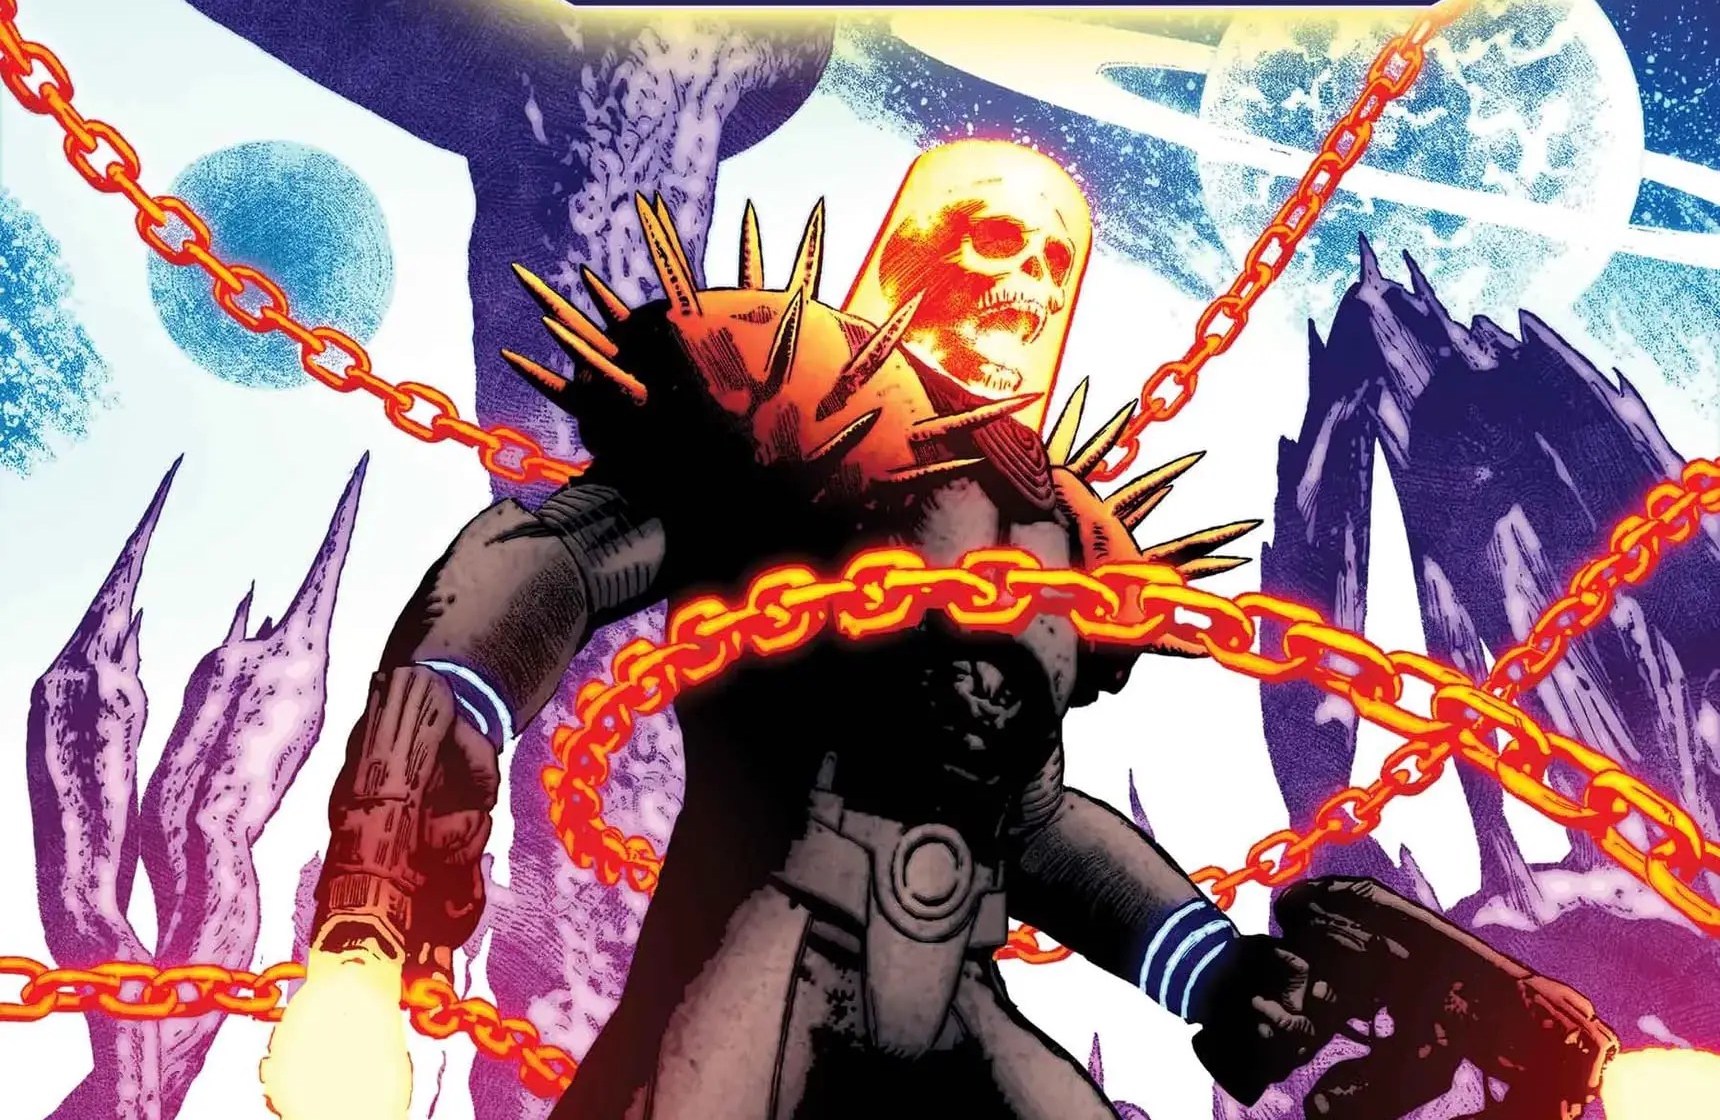 EXCLUSIVE Marvel Preview: Cosmic Ghost Rider #1